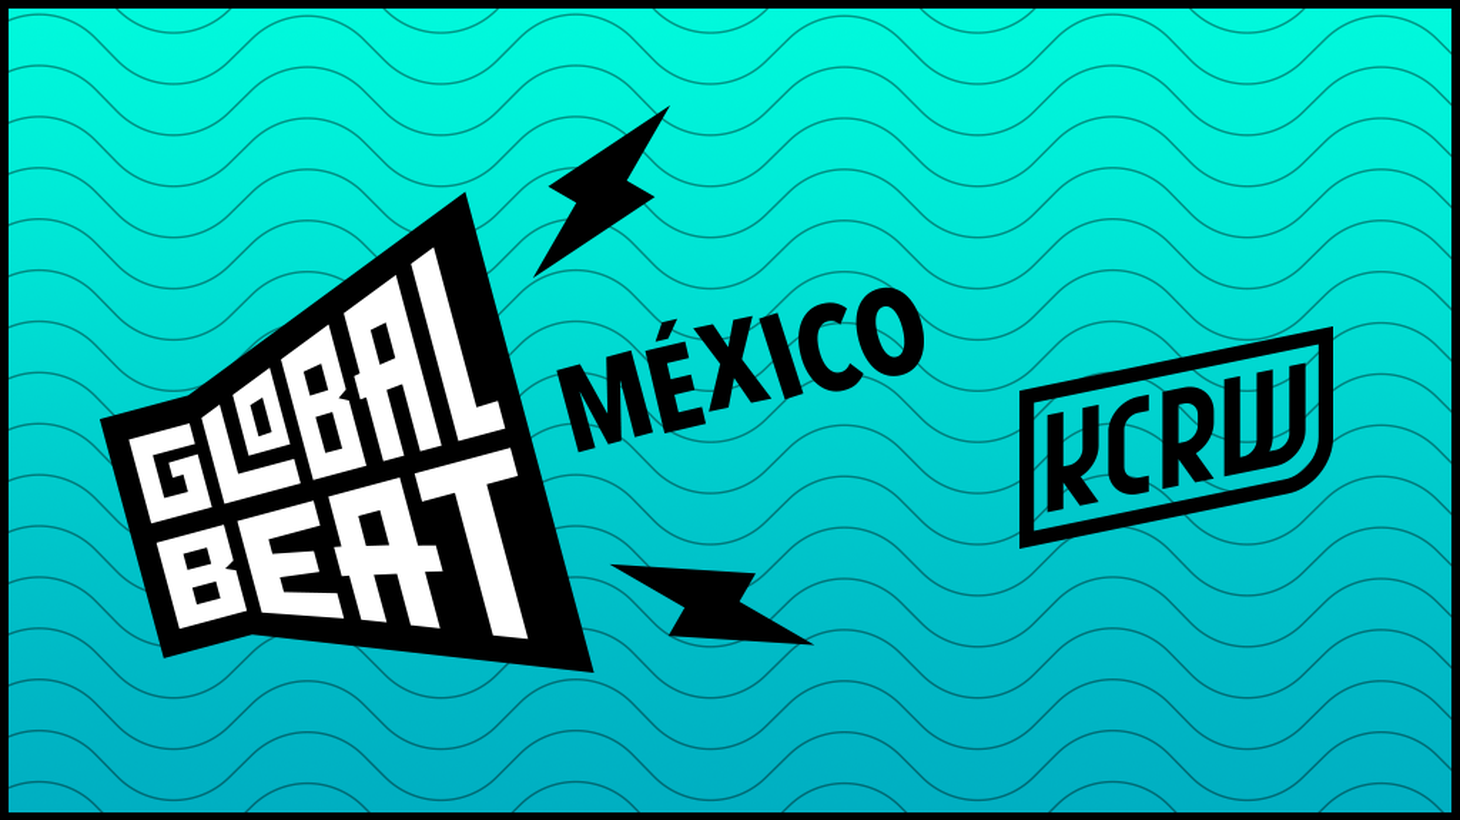 Welcome to KCRW’s Global Beat, a new series highlighting artists from around the world.